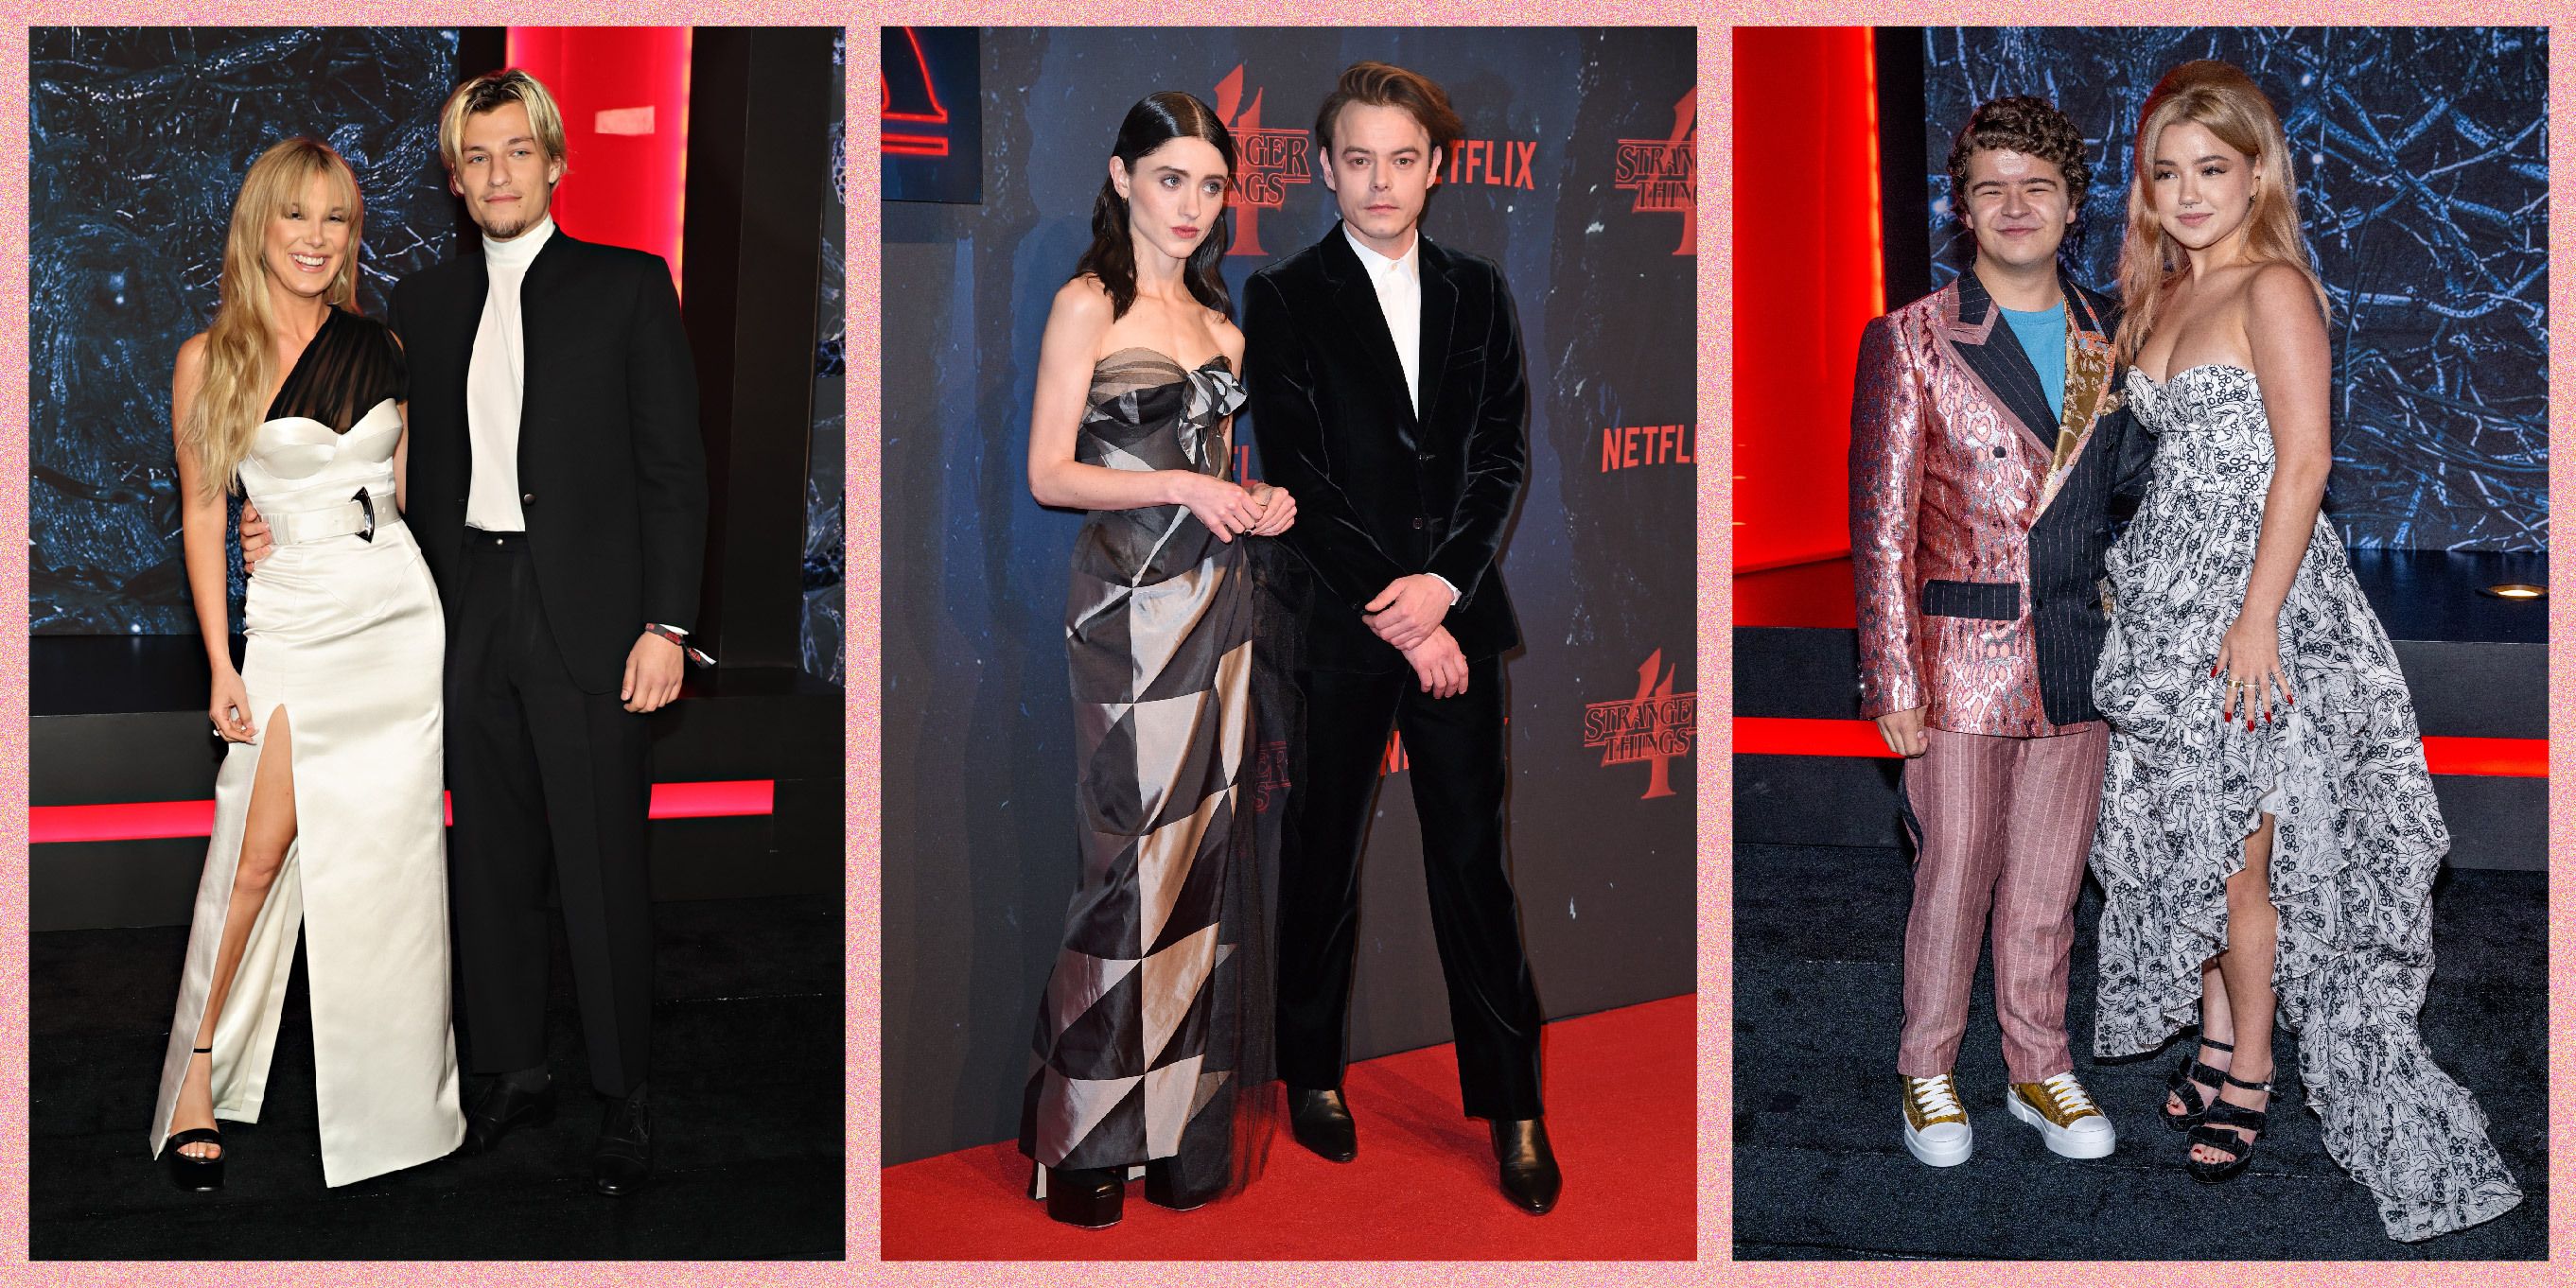 How the 'Stranger Things' Cast Dresses and Looks in Real Life